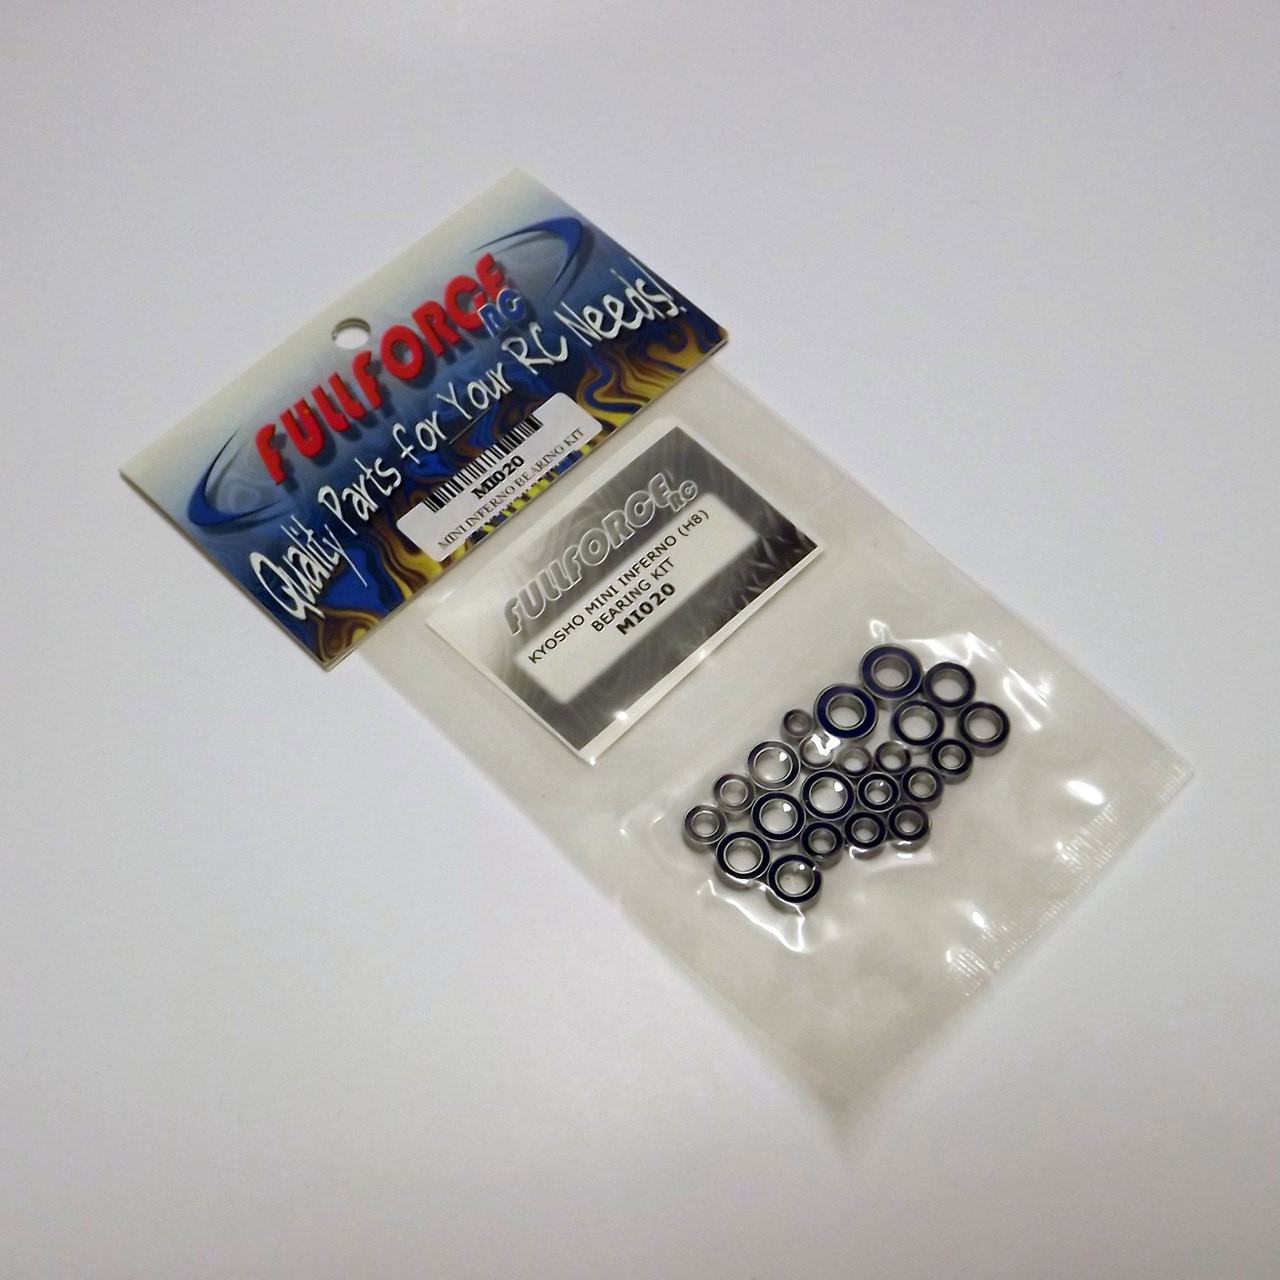 Mini inferno (half 8) bearing kit packed and ready to ship!